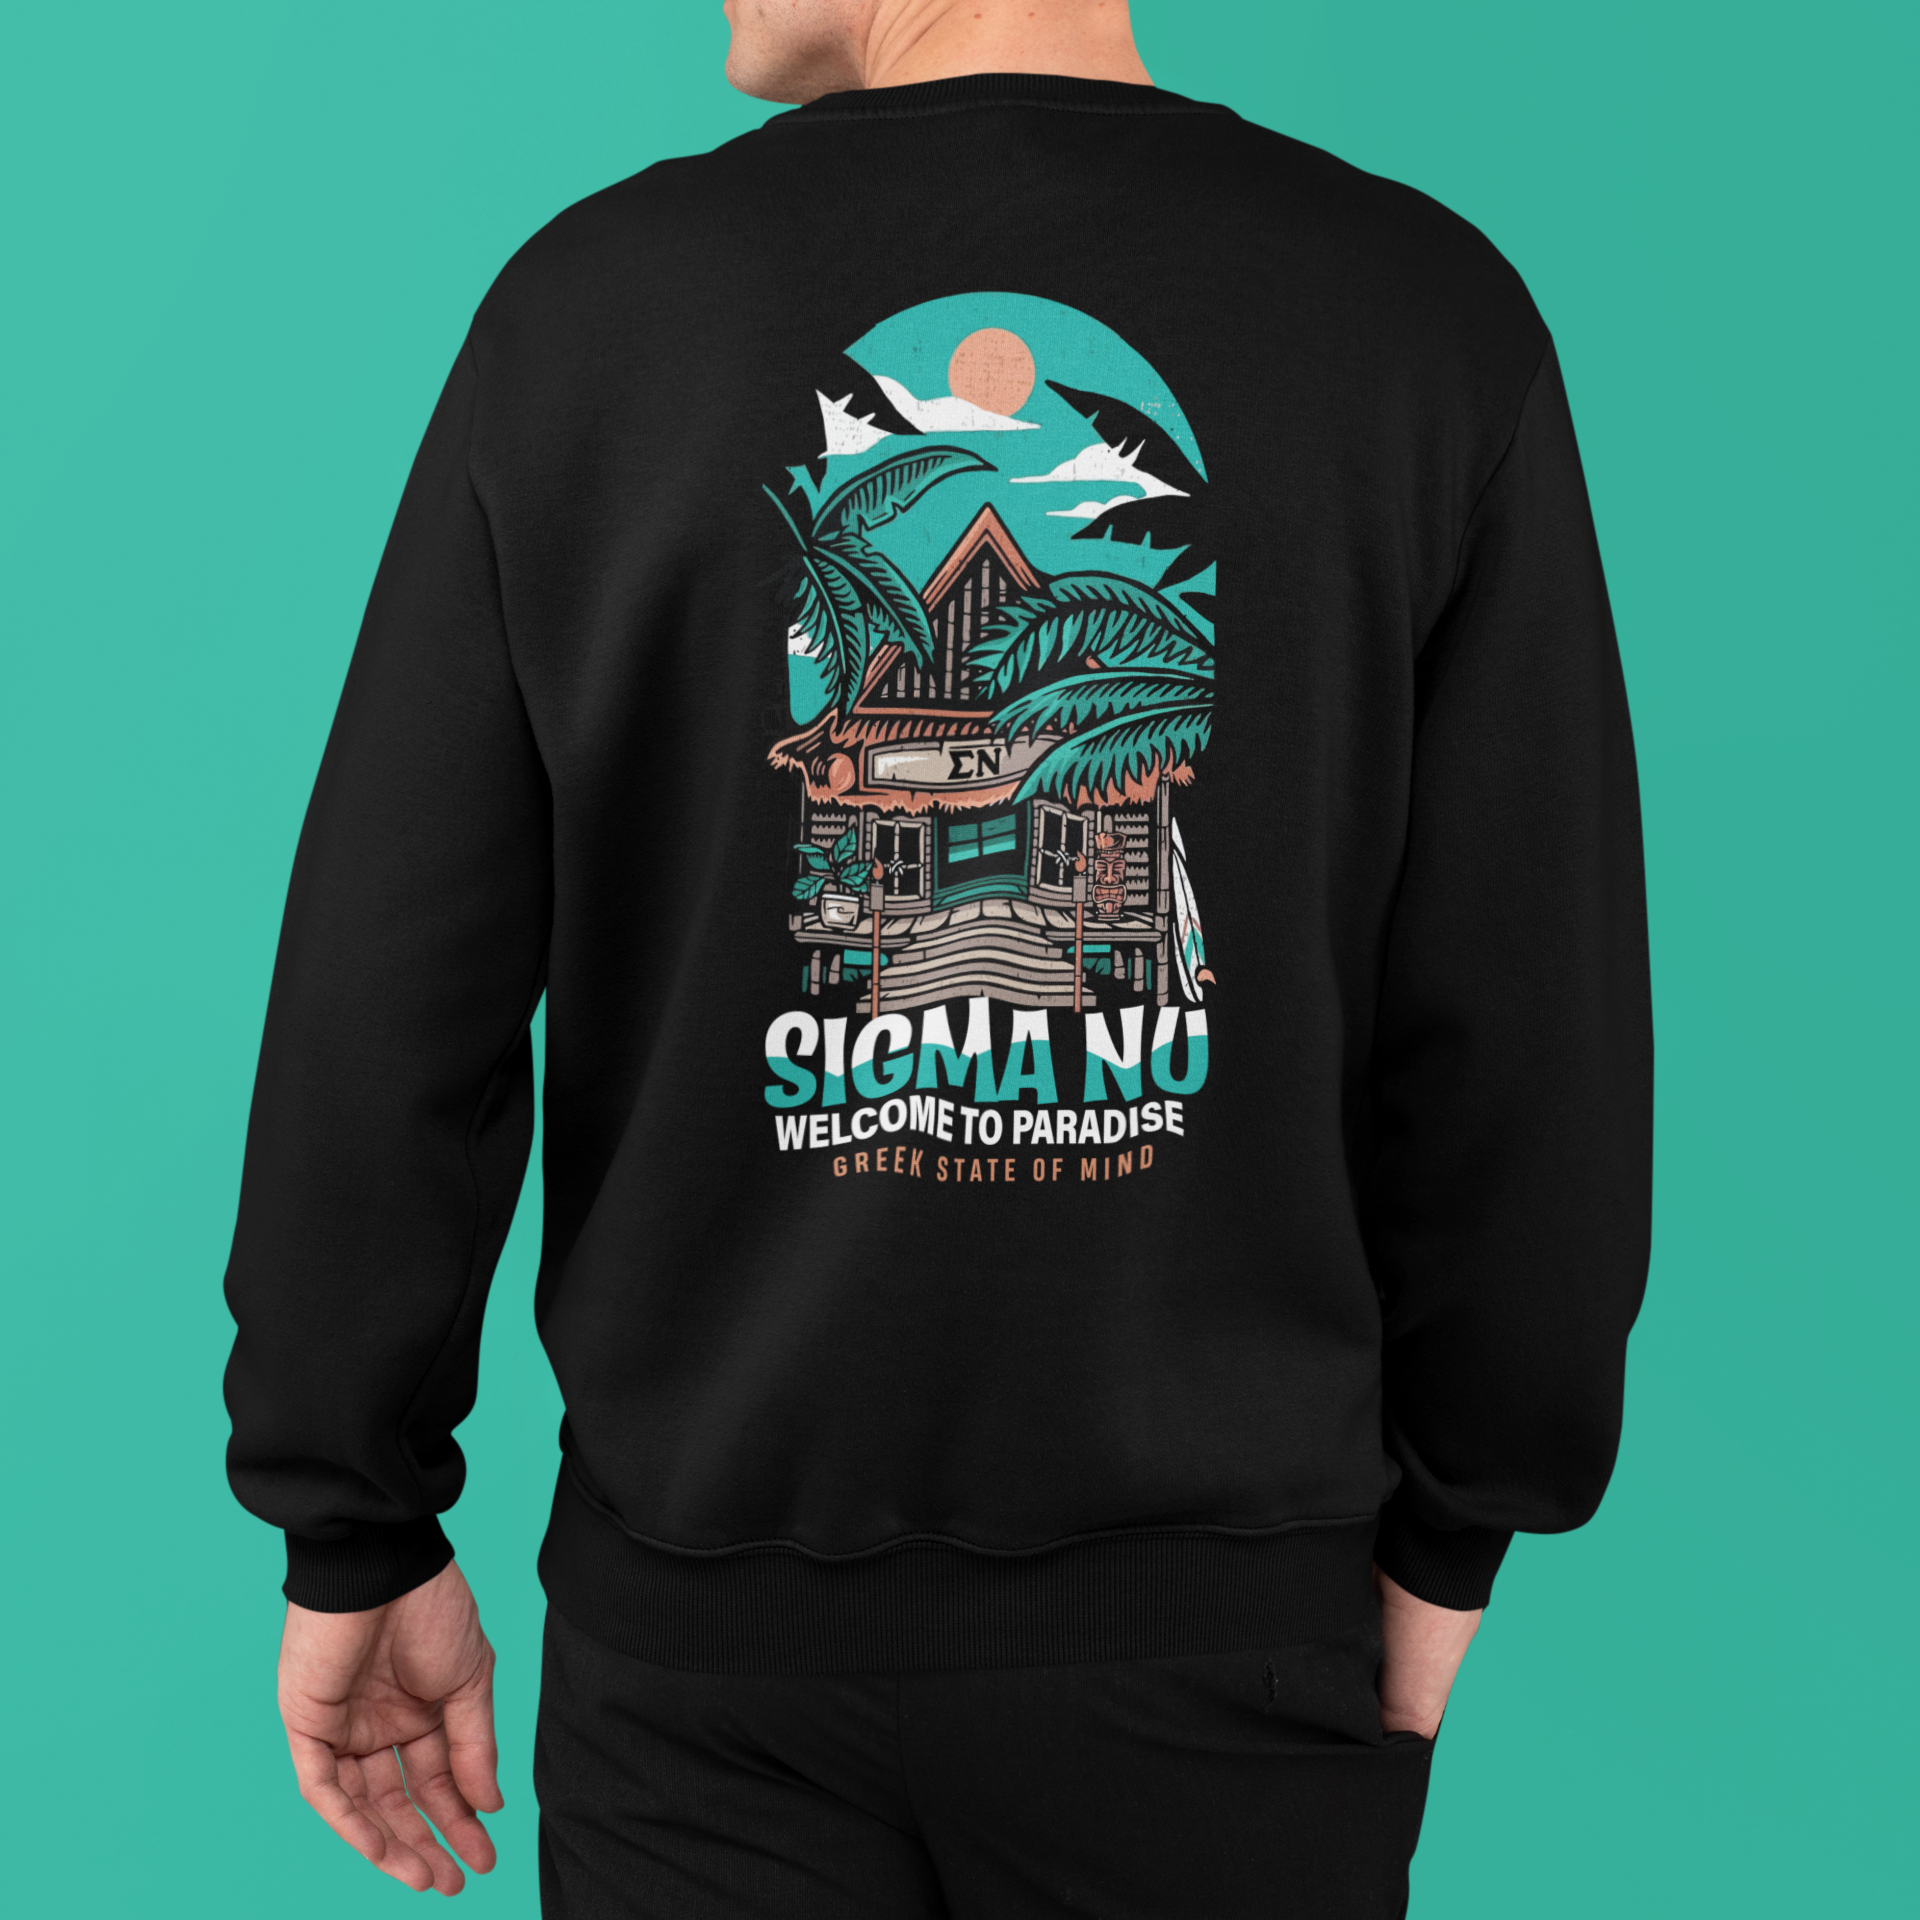 Sigma Nu Graphic Crewneck Sweatshirt | Welcome to Paradise | Sigma Nu Clothing, Apparel and Merchandise back model 